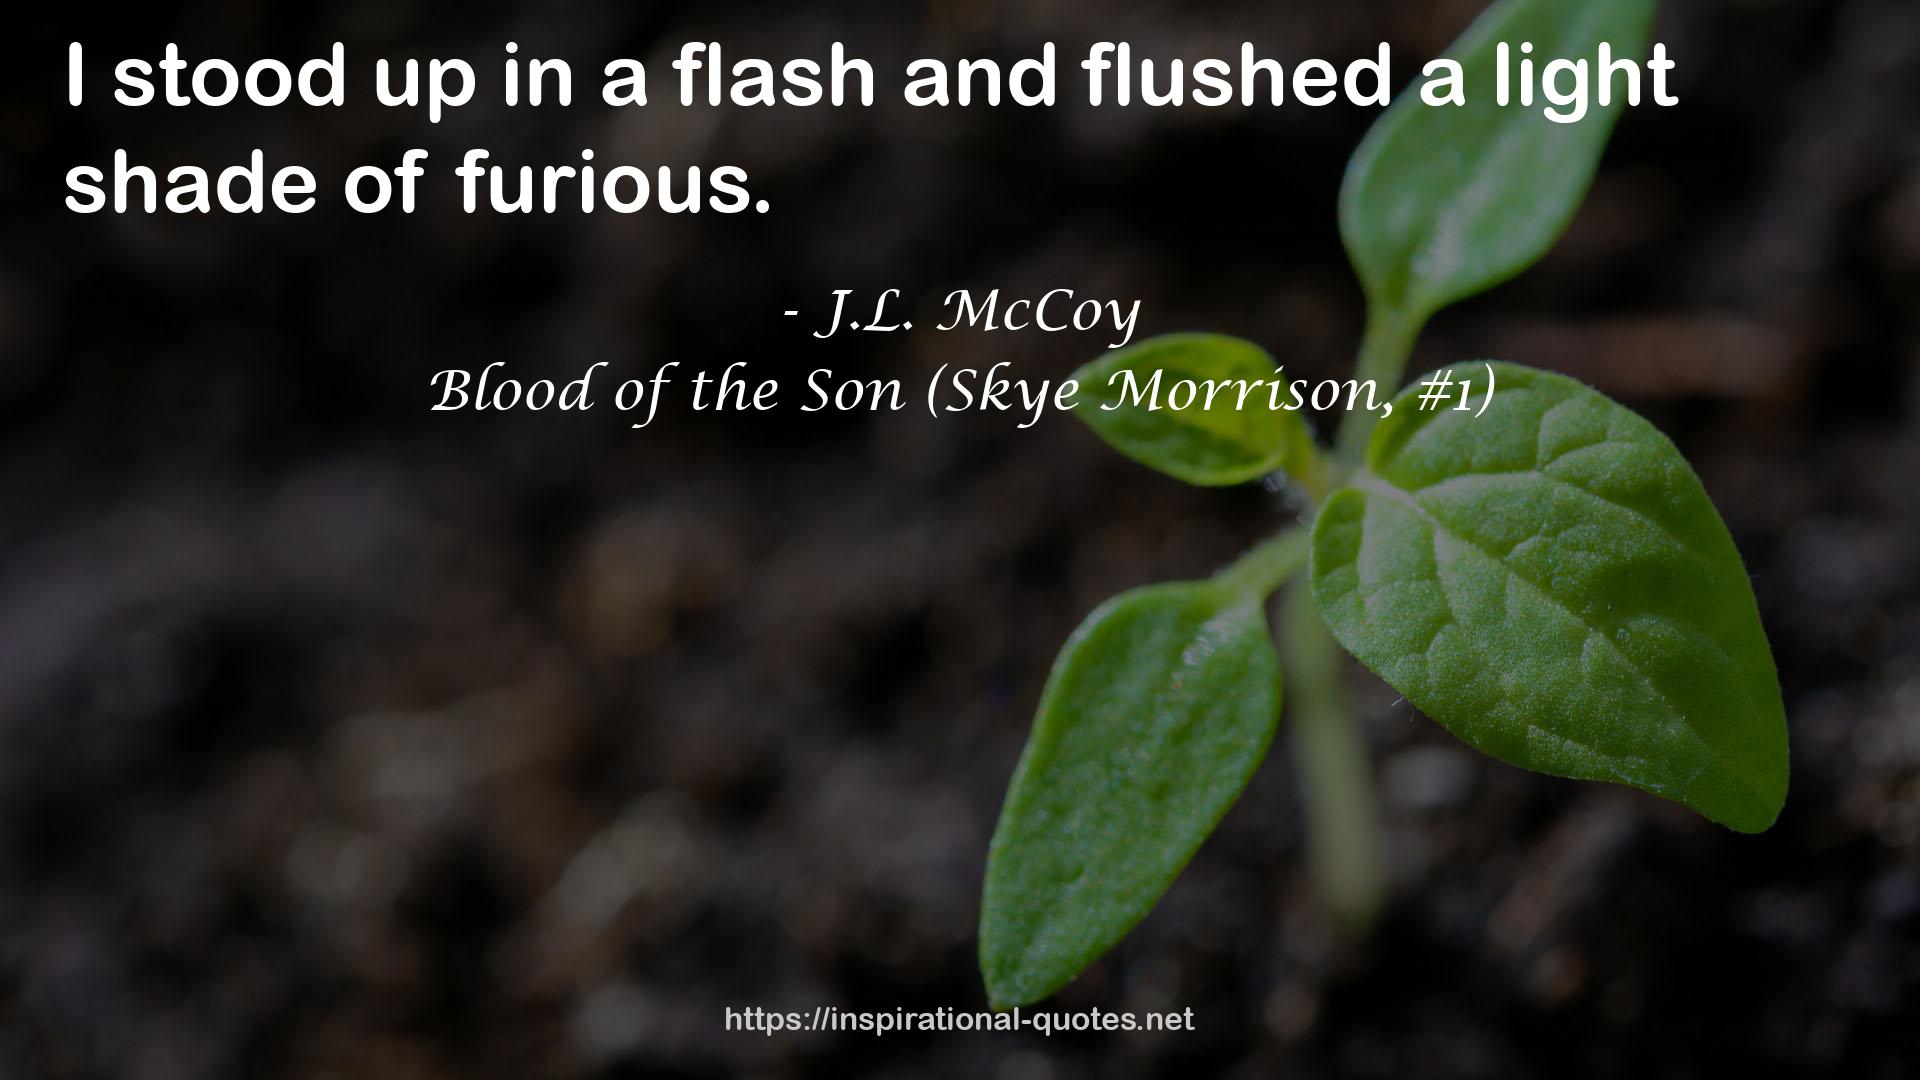 Blood of the Son (Skye Morrison, #1) QUOTES